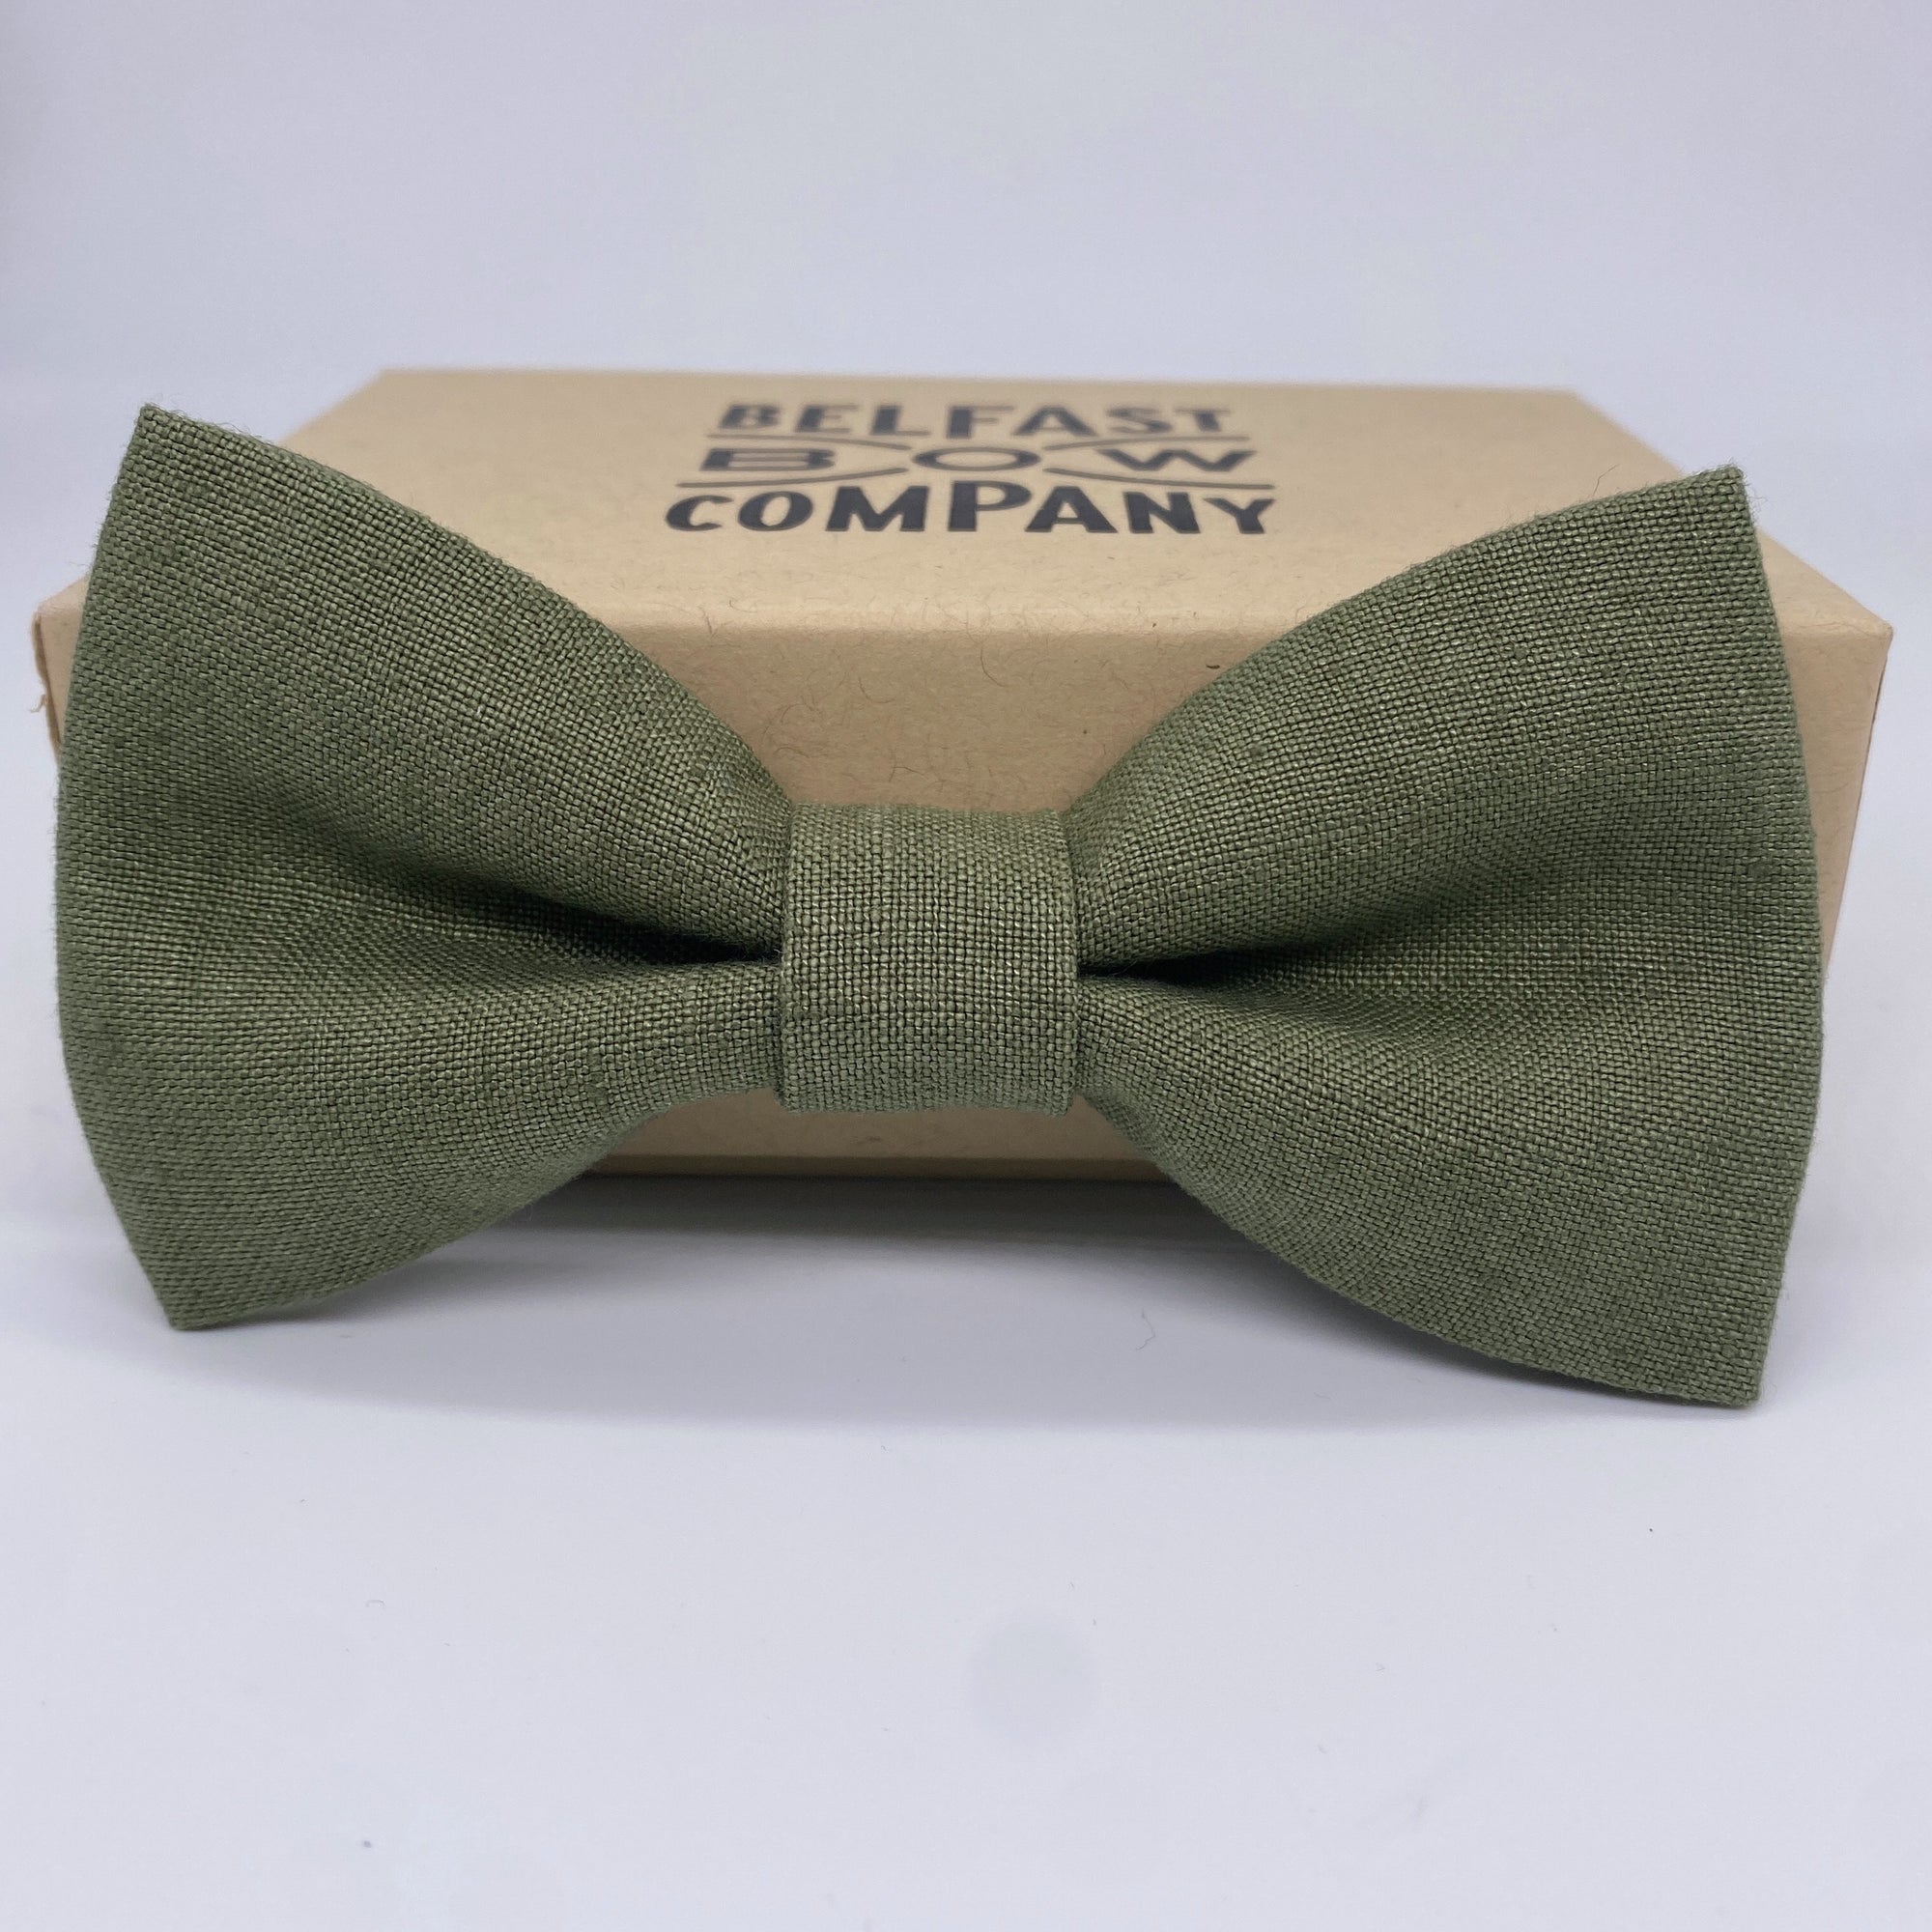 Irish Linen Bow Tie in Olive Khaki Green by the Belfast Bow Company